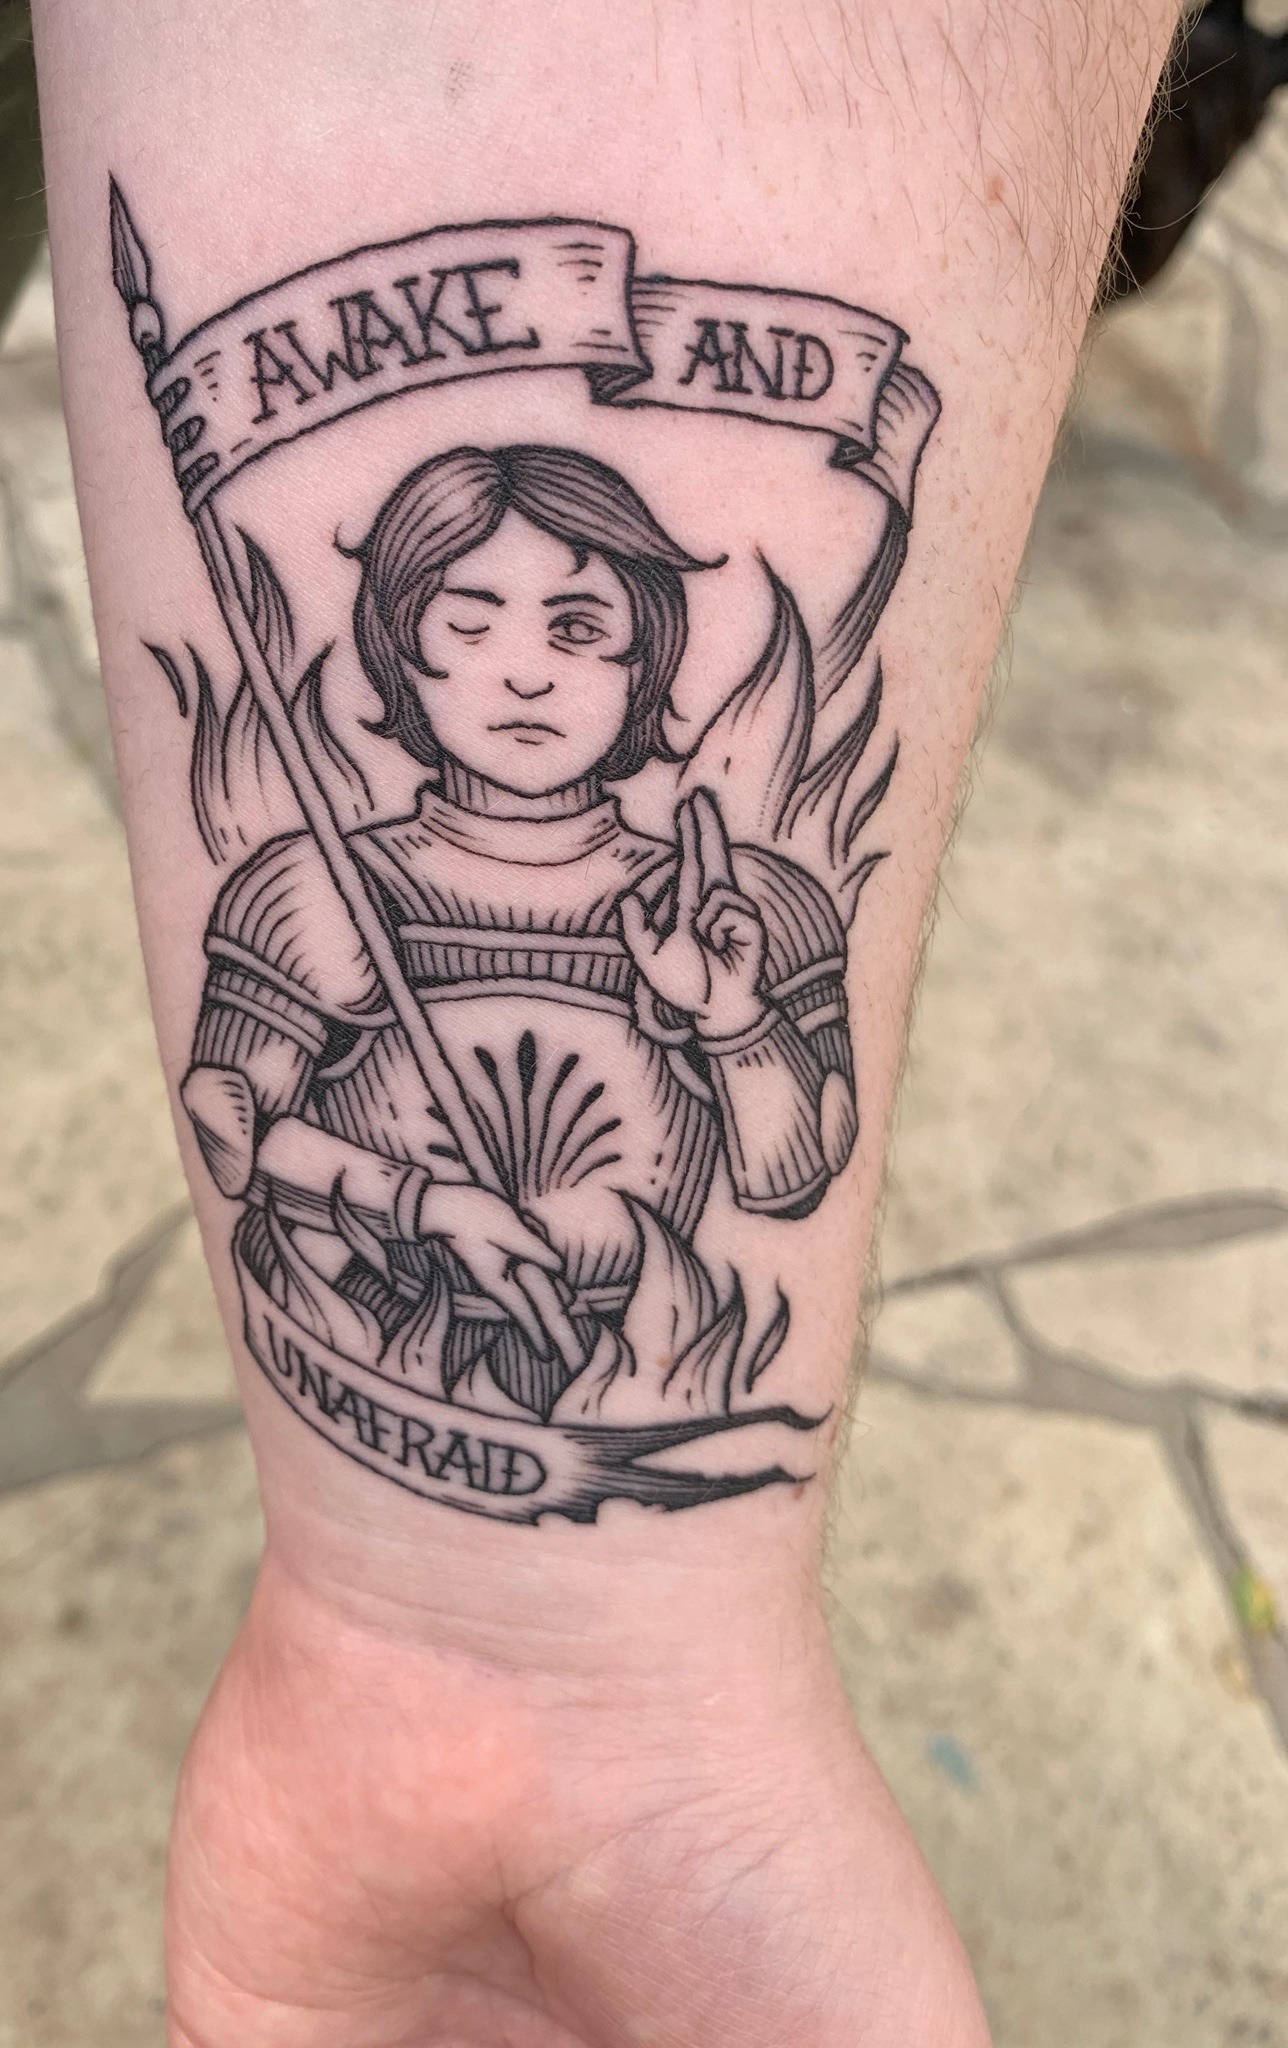 blackmoldmp3:blackmoldmp3:heres my joan of arc/famous last words tattoo!!!! done by @/ek.tattoos (follow them on instagram!!)ive wanted this for like 11 years lmaomore pics now that my skin isn’t like glowing red lol